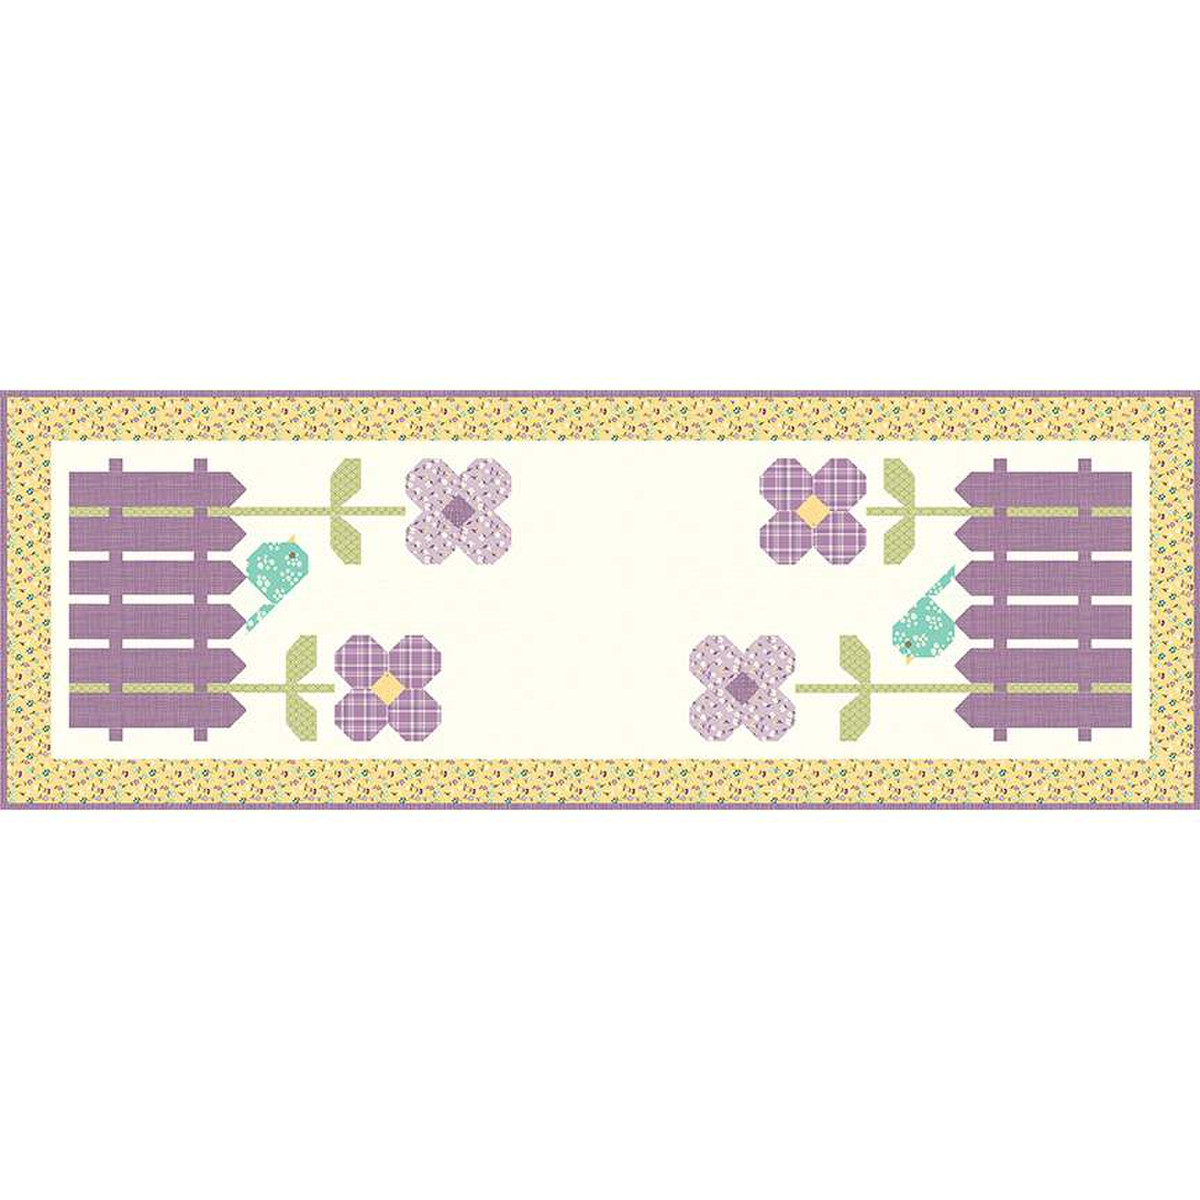 REST STOP Table Runner Pattern by Sandy Gervais